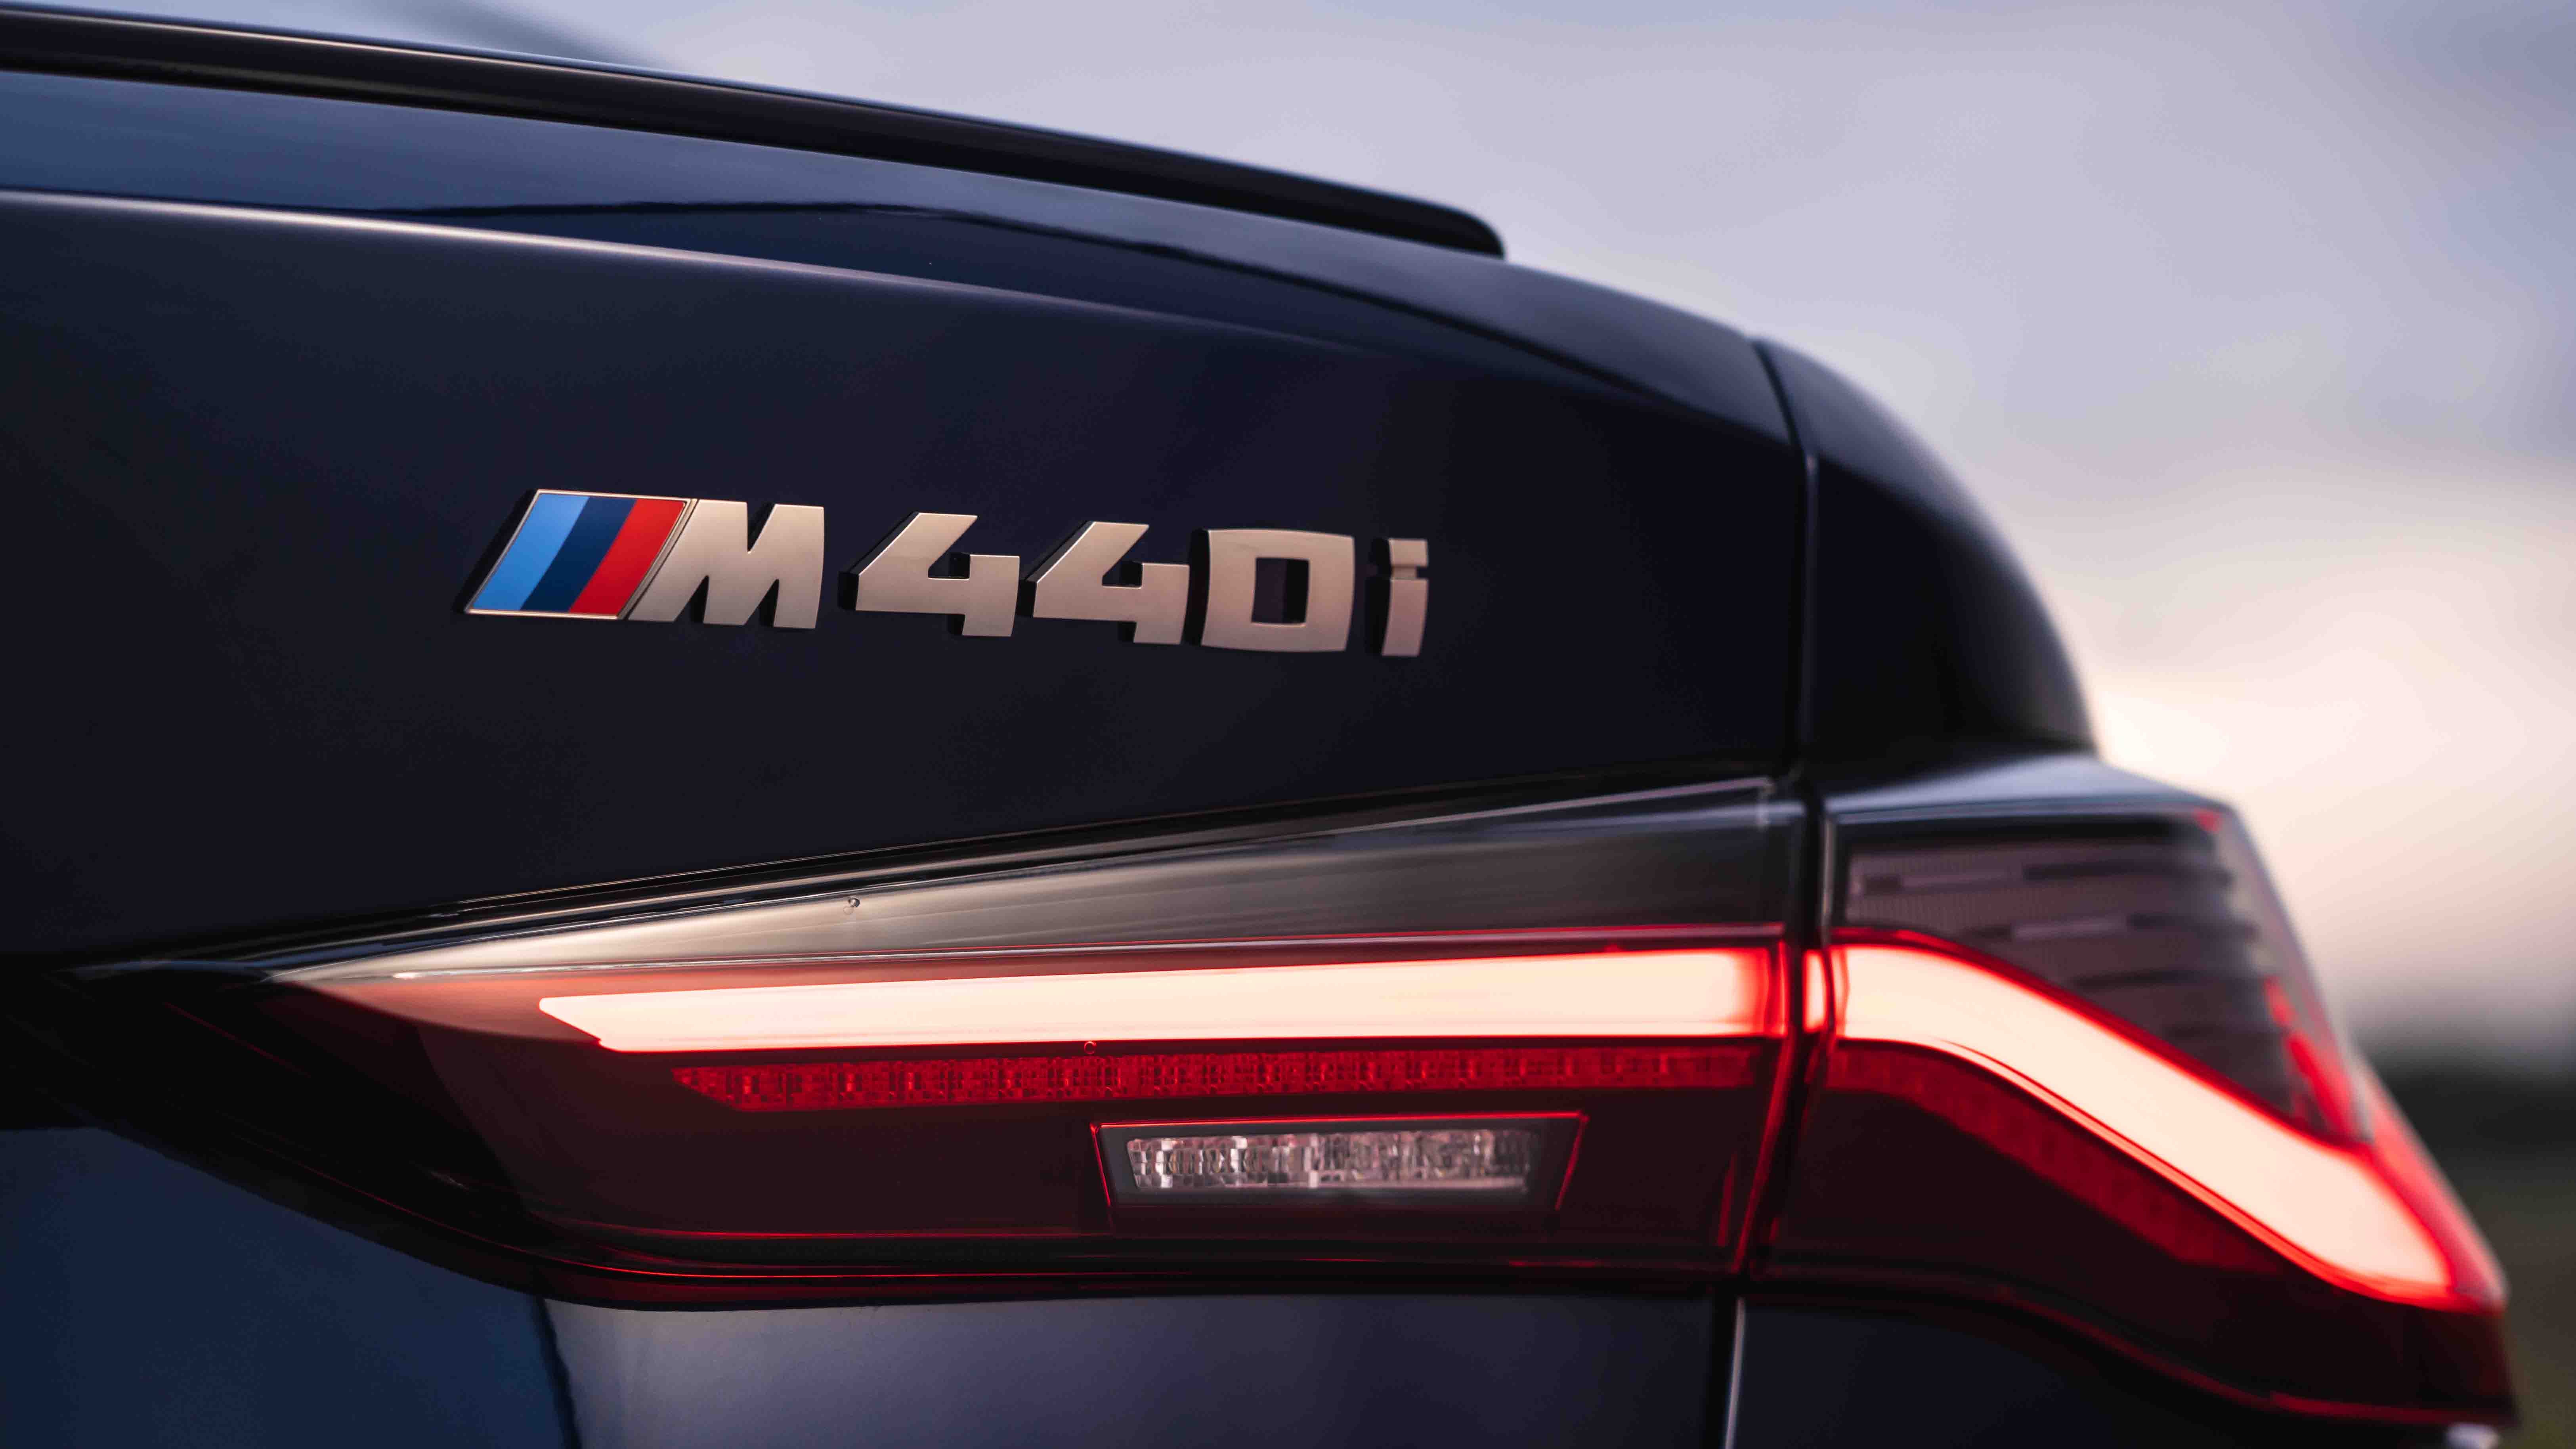 BMW 4 Series tail-light and M440i badge